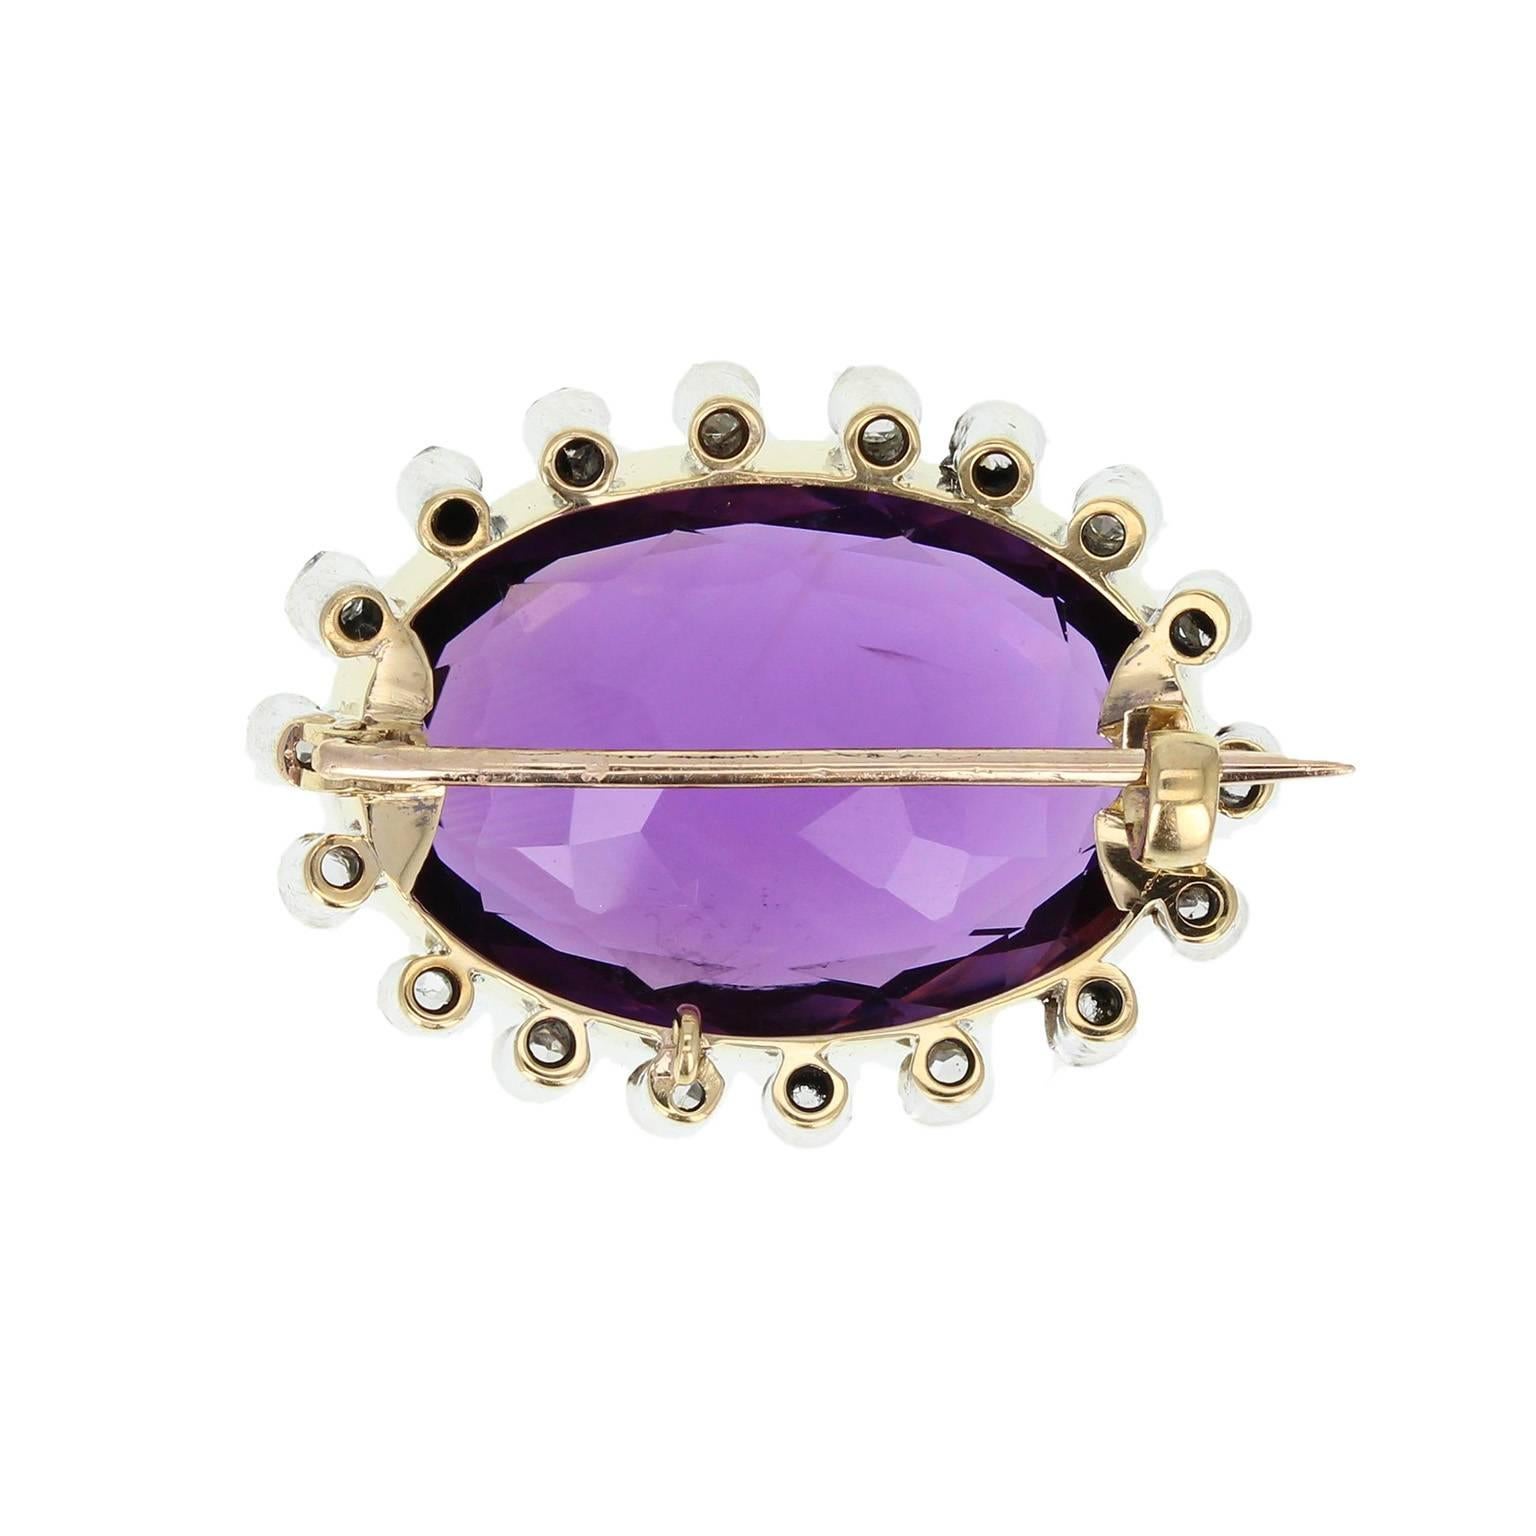 An exquisite colour amethyst with excellent saturation, rub-over set in a mille-grain edge. Surrounded by 18 individually rub-over set old-cut diamonds. An excellent example of Victorian 15ct gold and silver jewellery set with a particularly